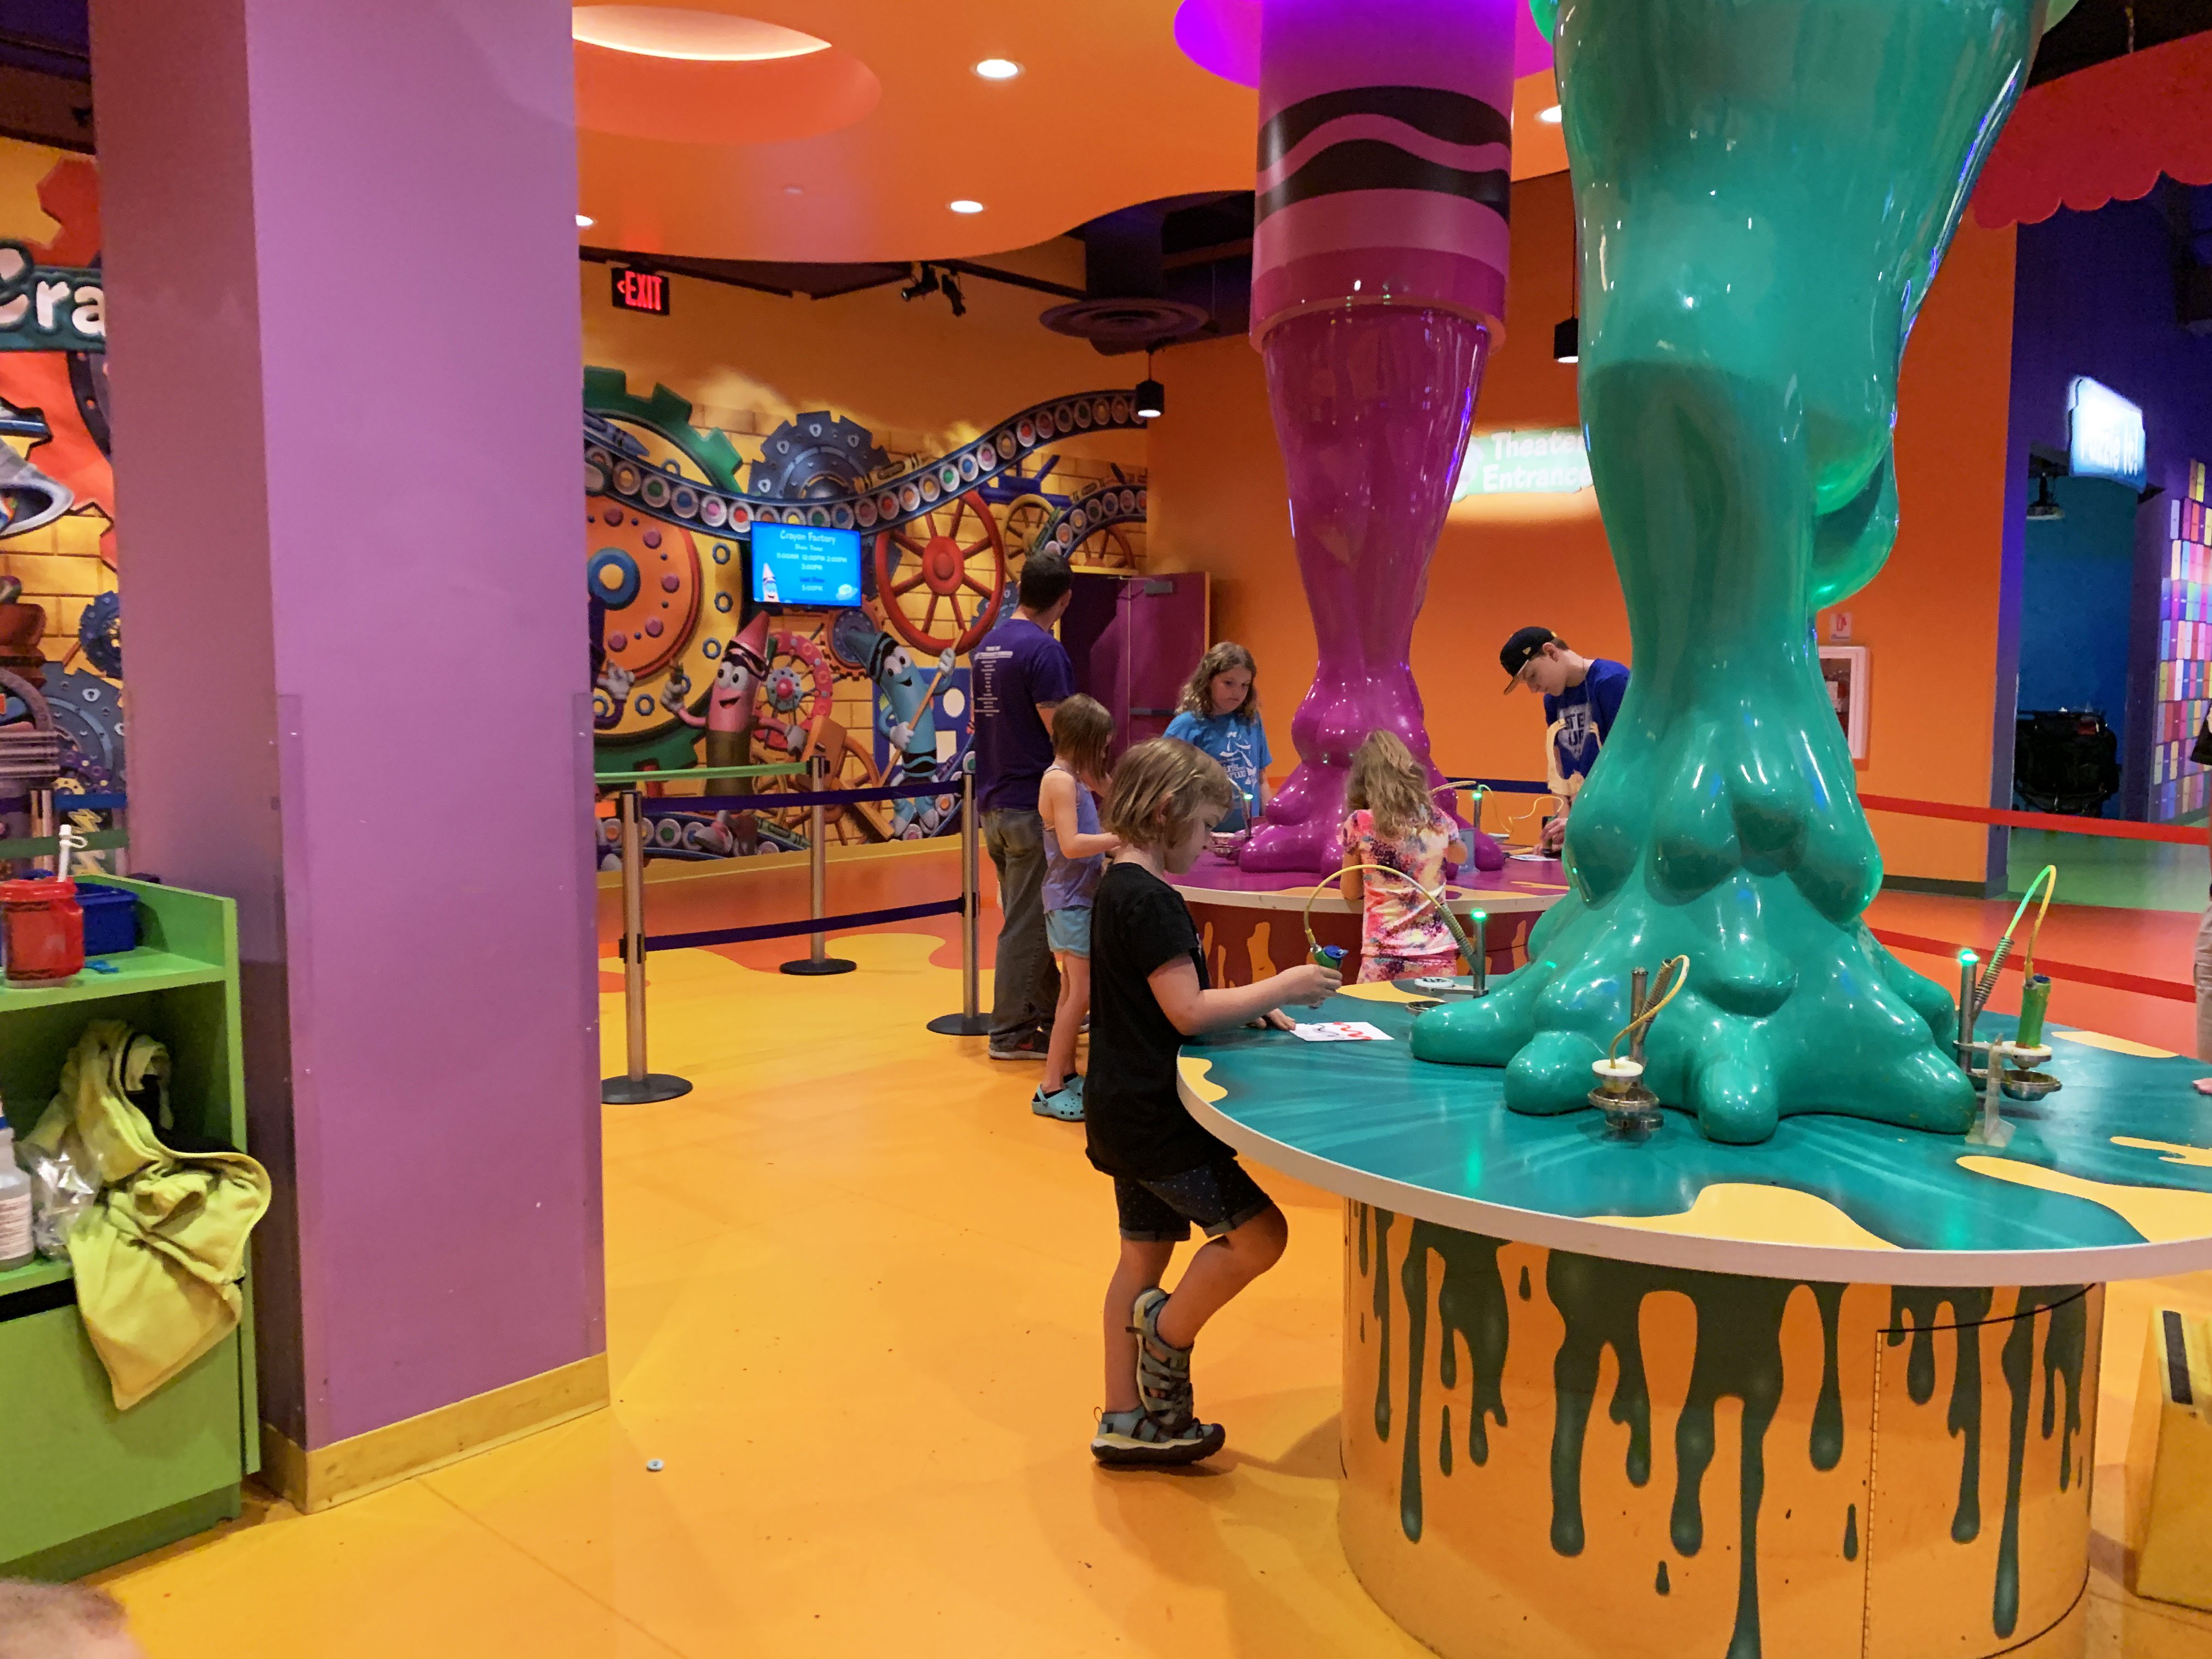 Crayola Experience at MOA $24.99 Admission to the Crayola Experience.